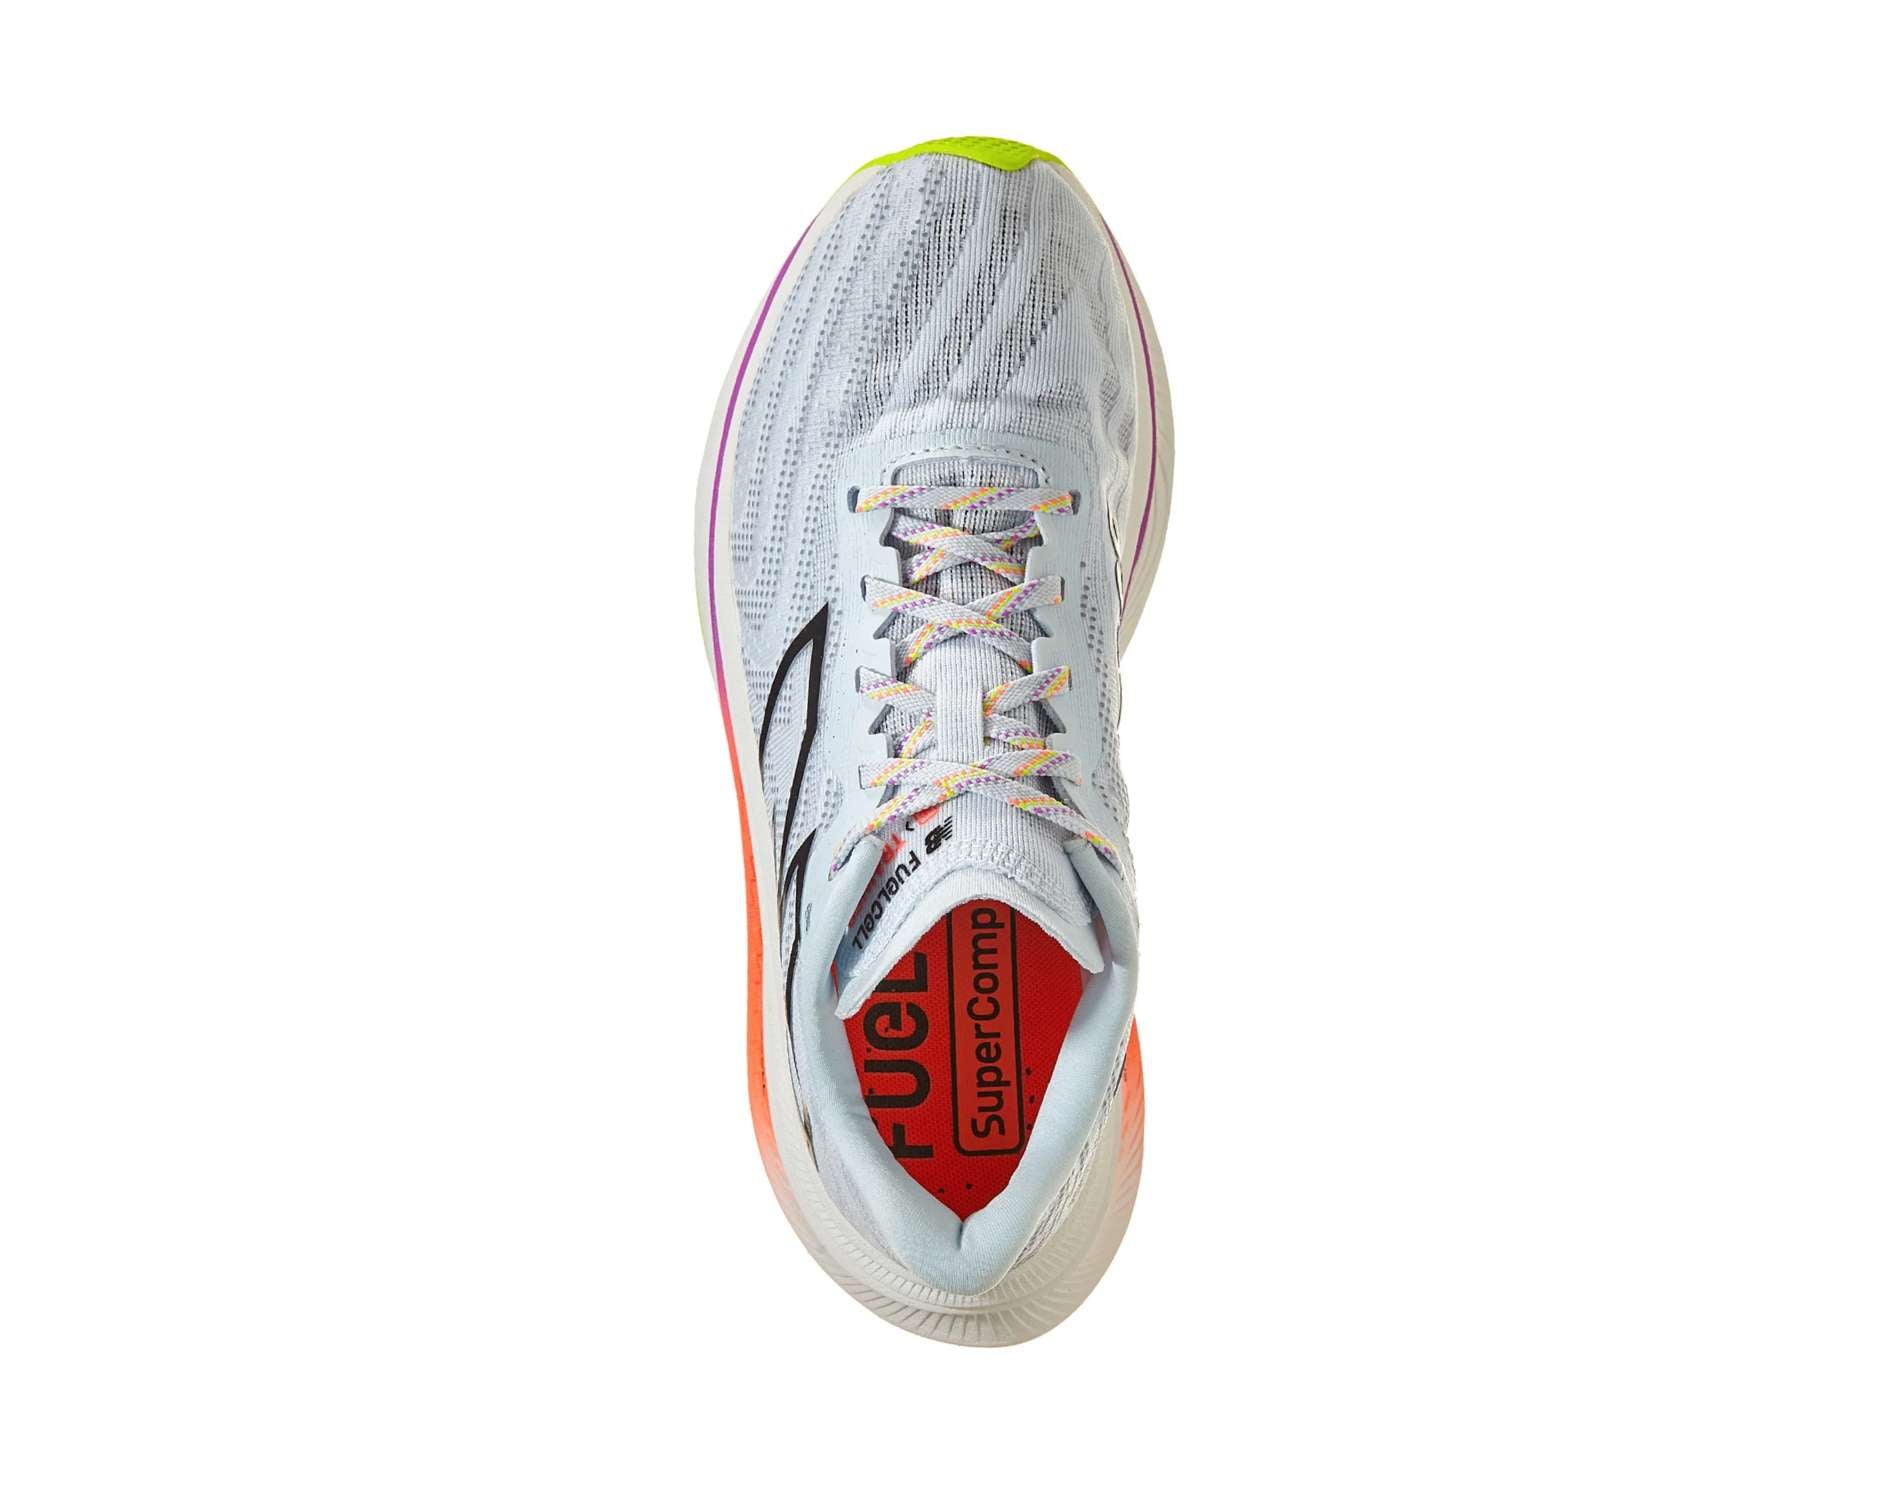 New Balance Fuelcell Supercomp Trainer V2 Womens